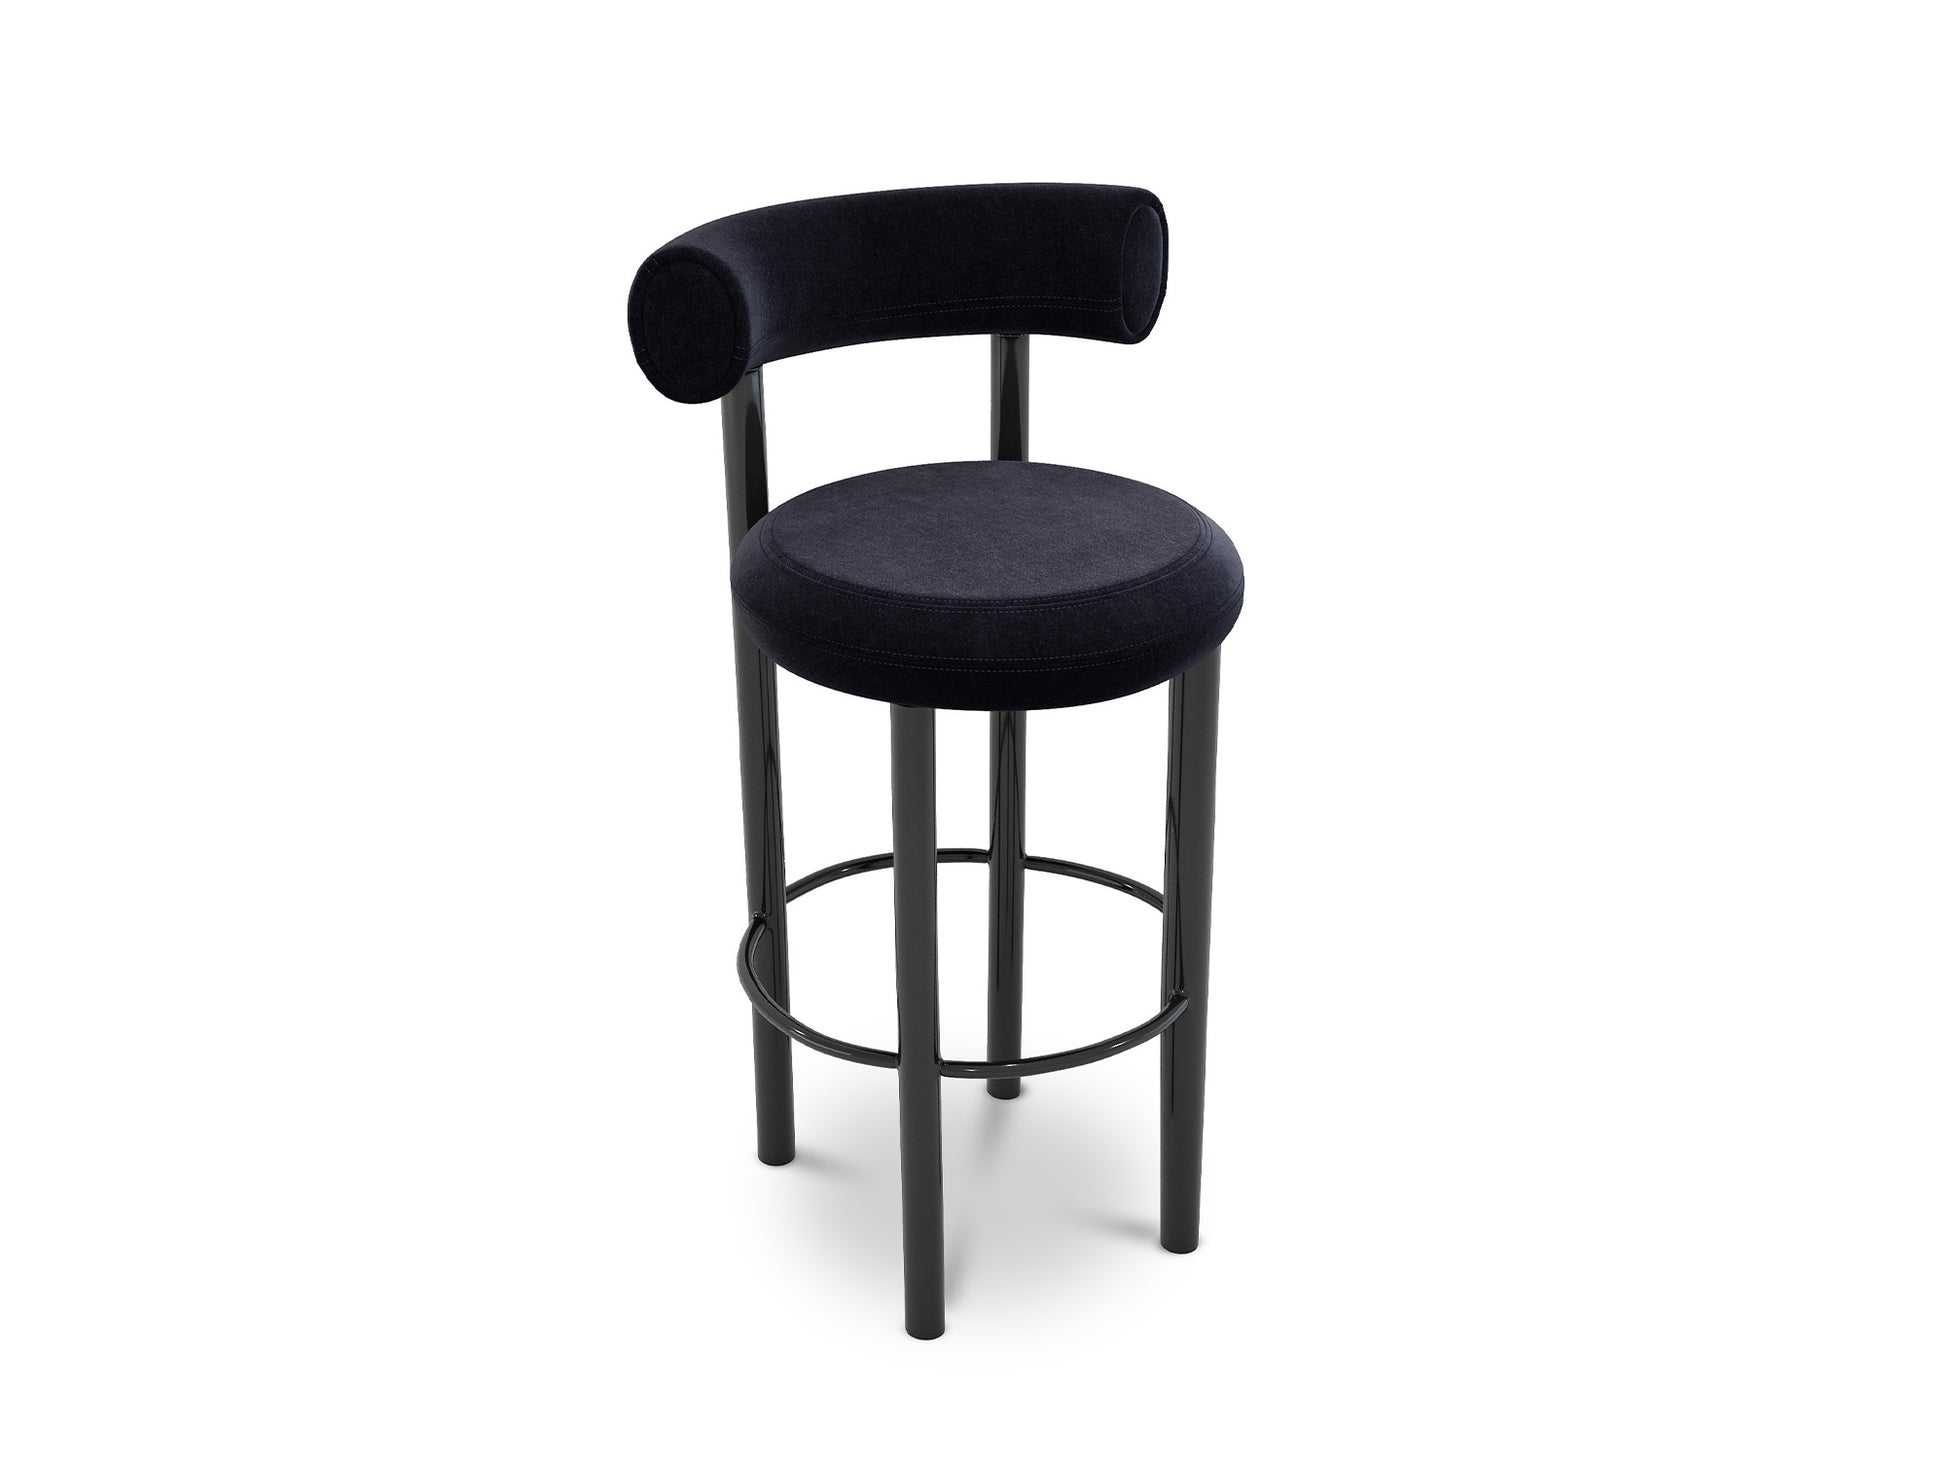 Fat Bar/Counter Stool by Tom Dixon - Gentle 2 183